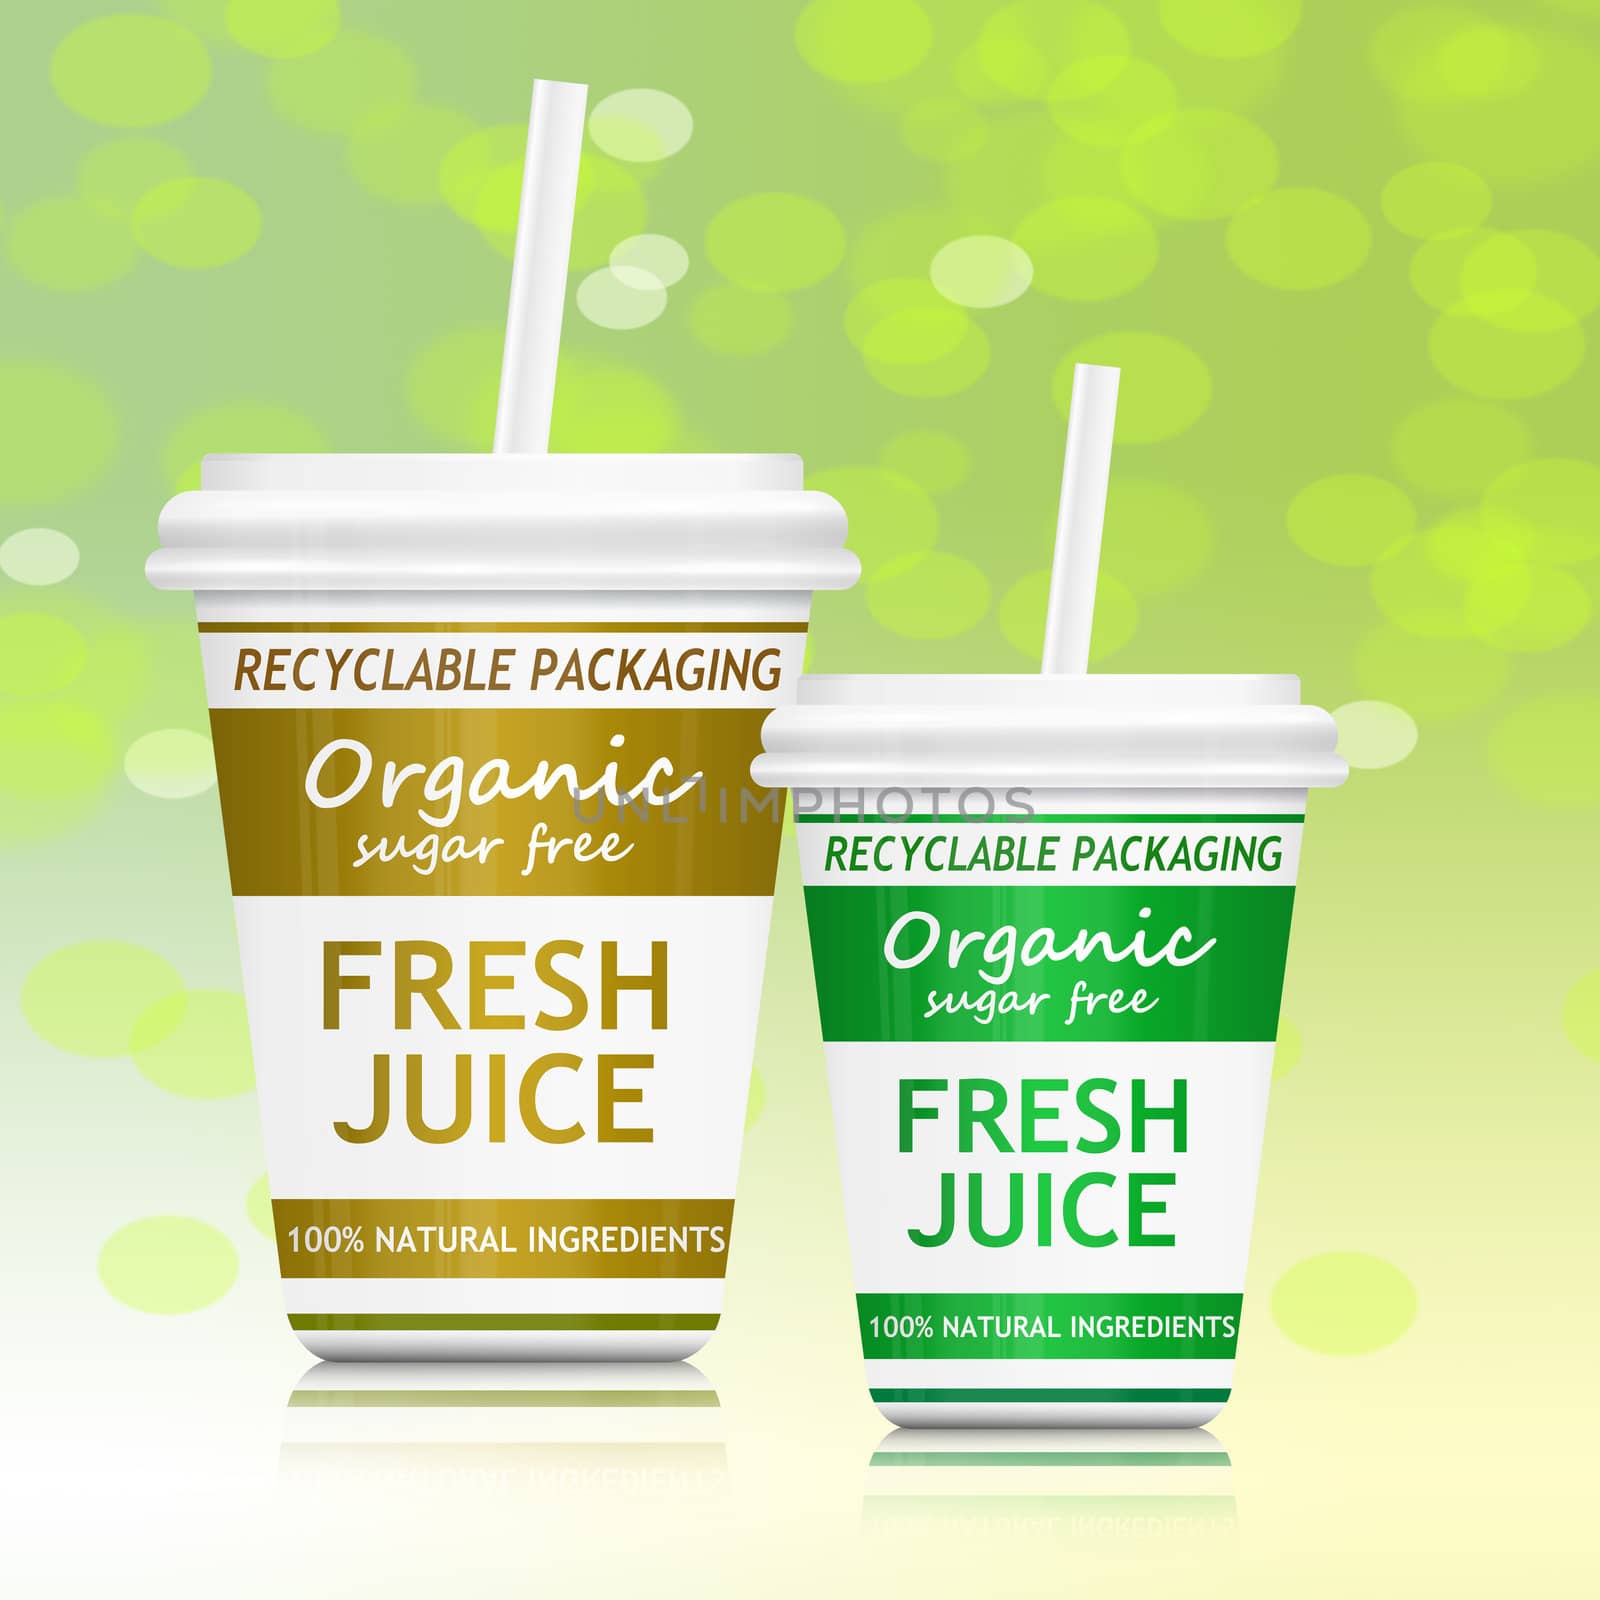 Illustration depicting a fast food drink container with a healthy and environmental concept. Arranged over abstract green and yellow background.